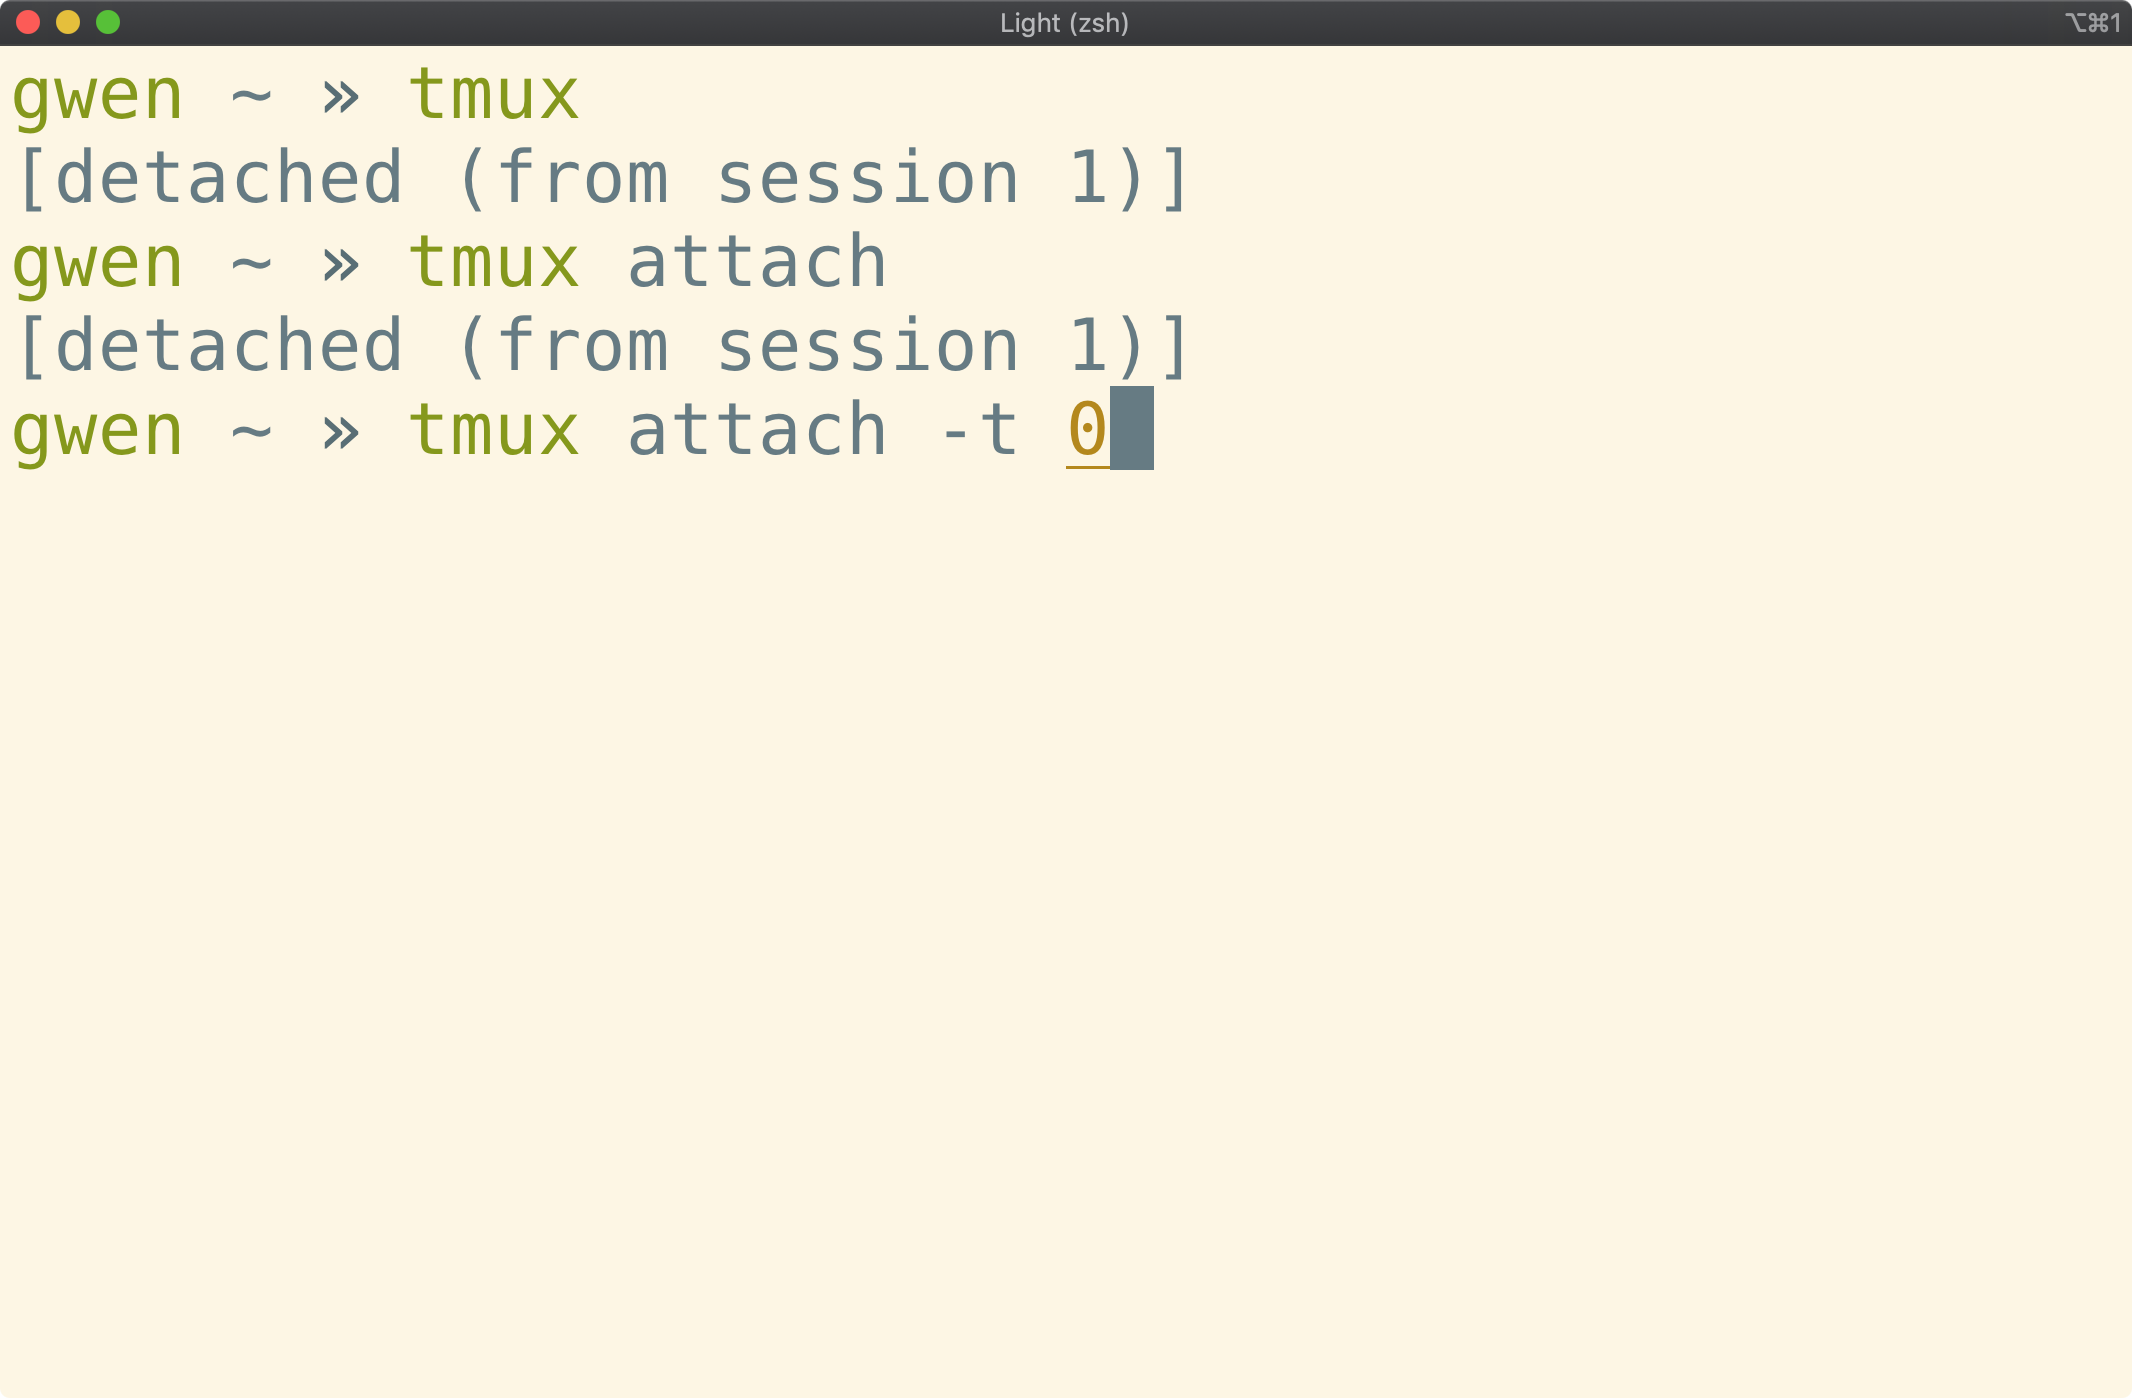 Terminal window showing <code>tmux attach -t 0</code> typed
in